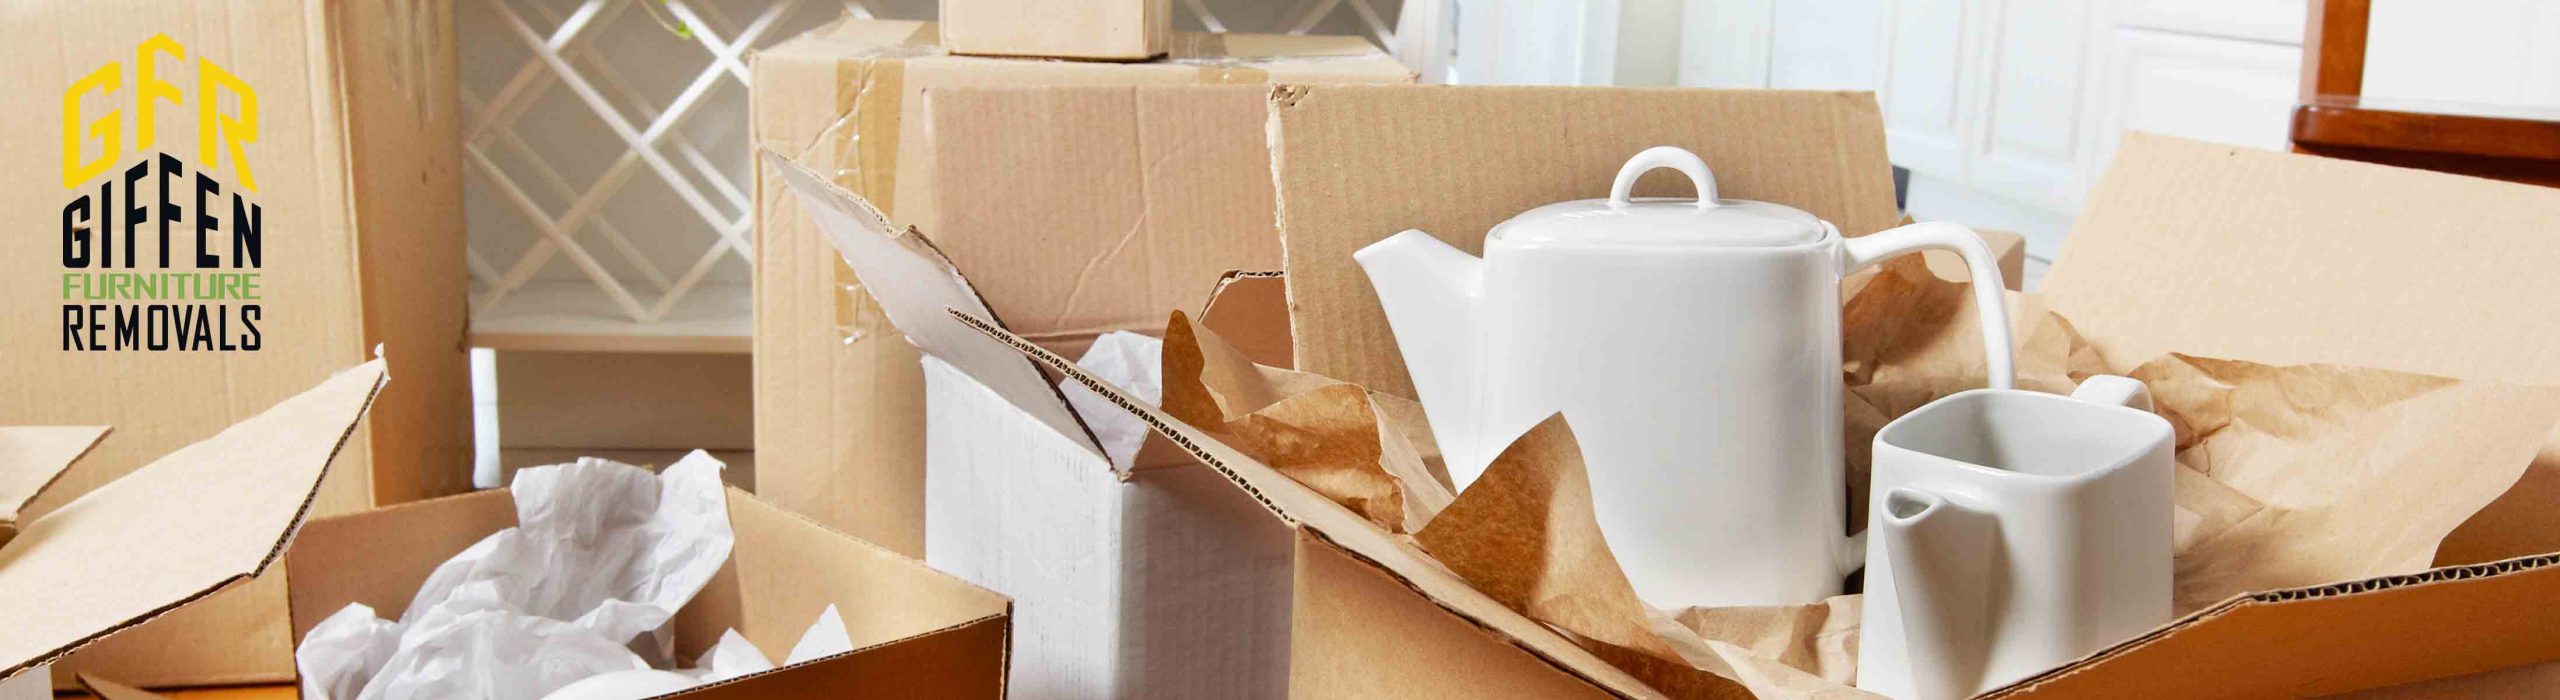 Giffen Furniture Removals How To Effectively Pack Your Kitchen When Moving House